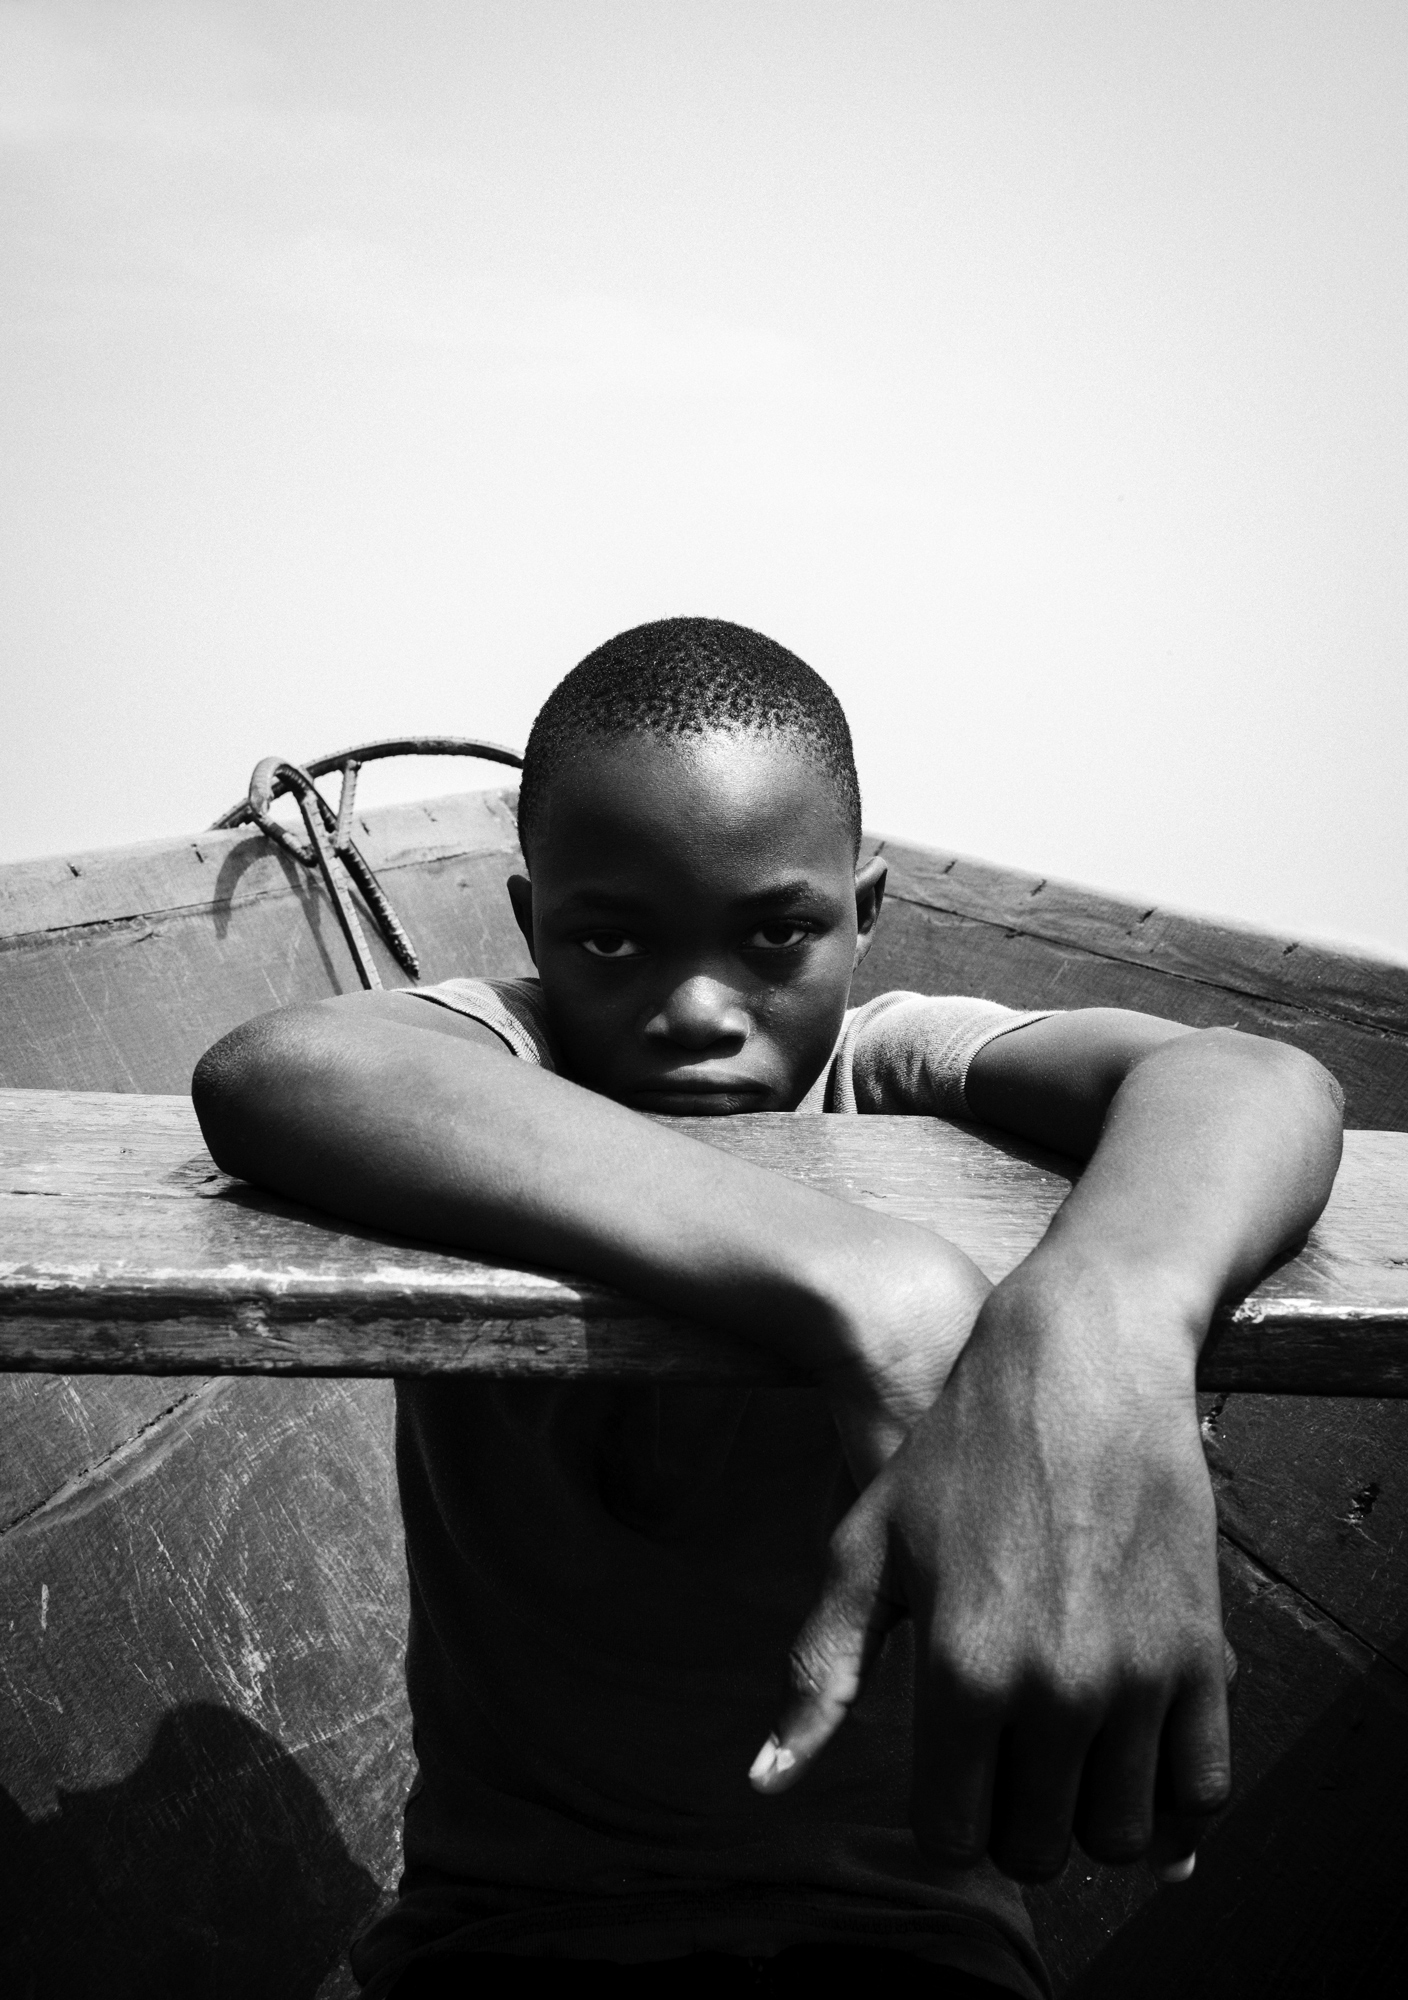  11-year-old Joseph is sitting in his father's wooden canoe near Ada Foah, Southern Ghana. This water taxi carries locals commuting between the many small villages located on the Volta River estuary.⁠ 